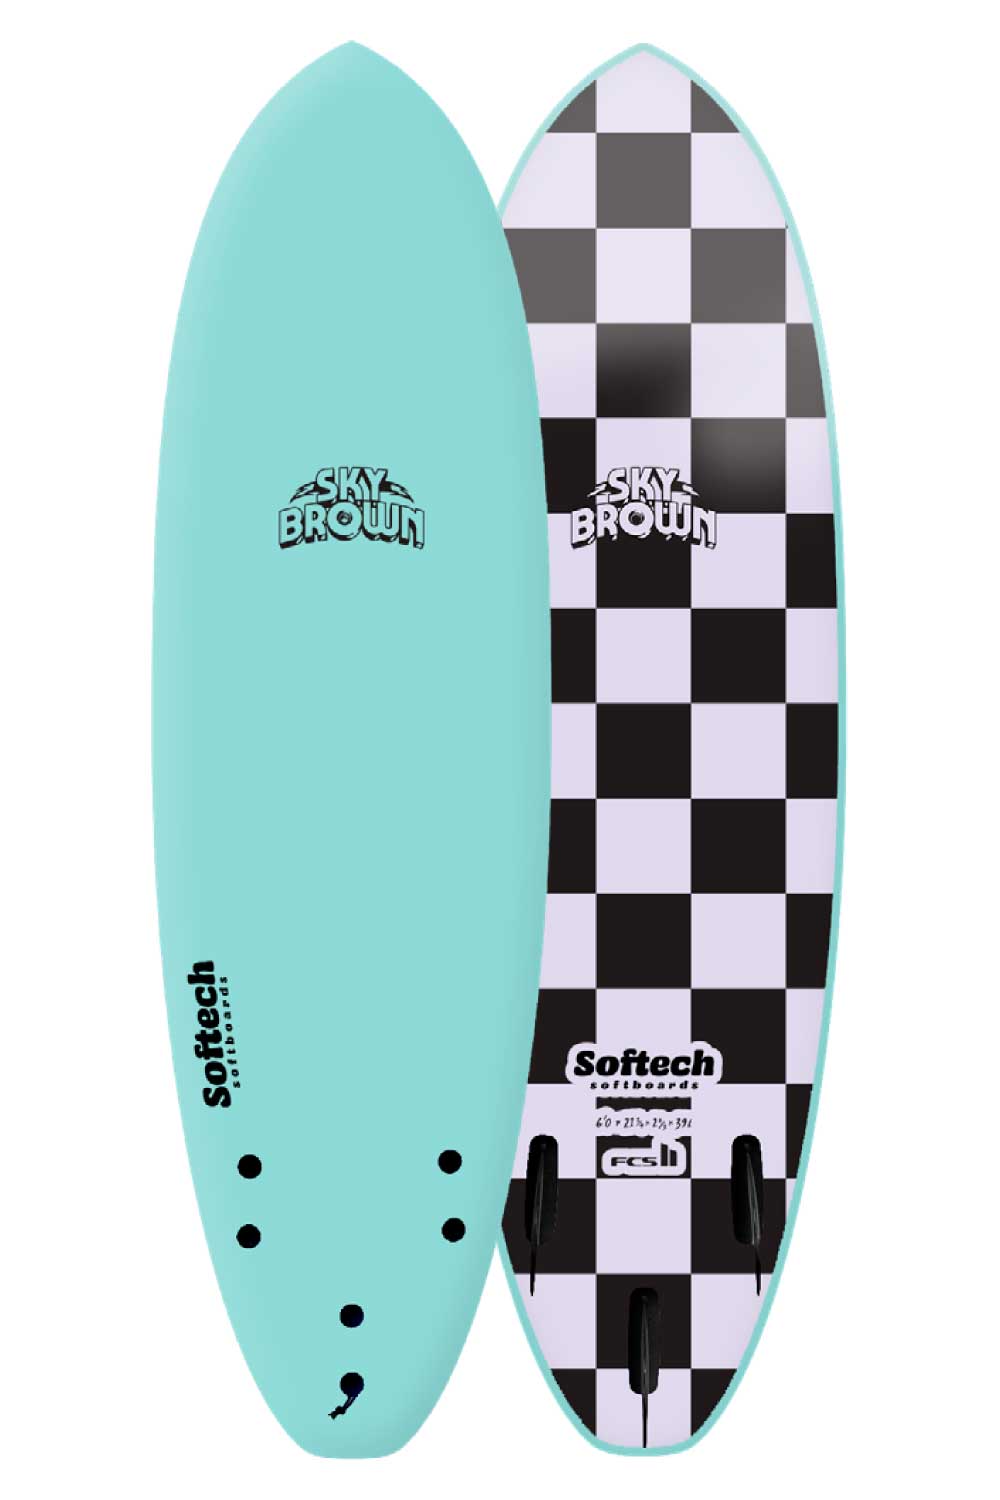 Softech Sky Brown Signature Softboard - Fins not included